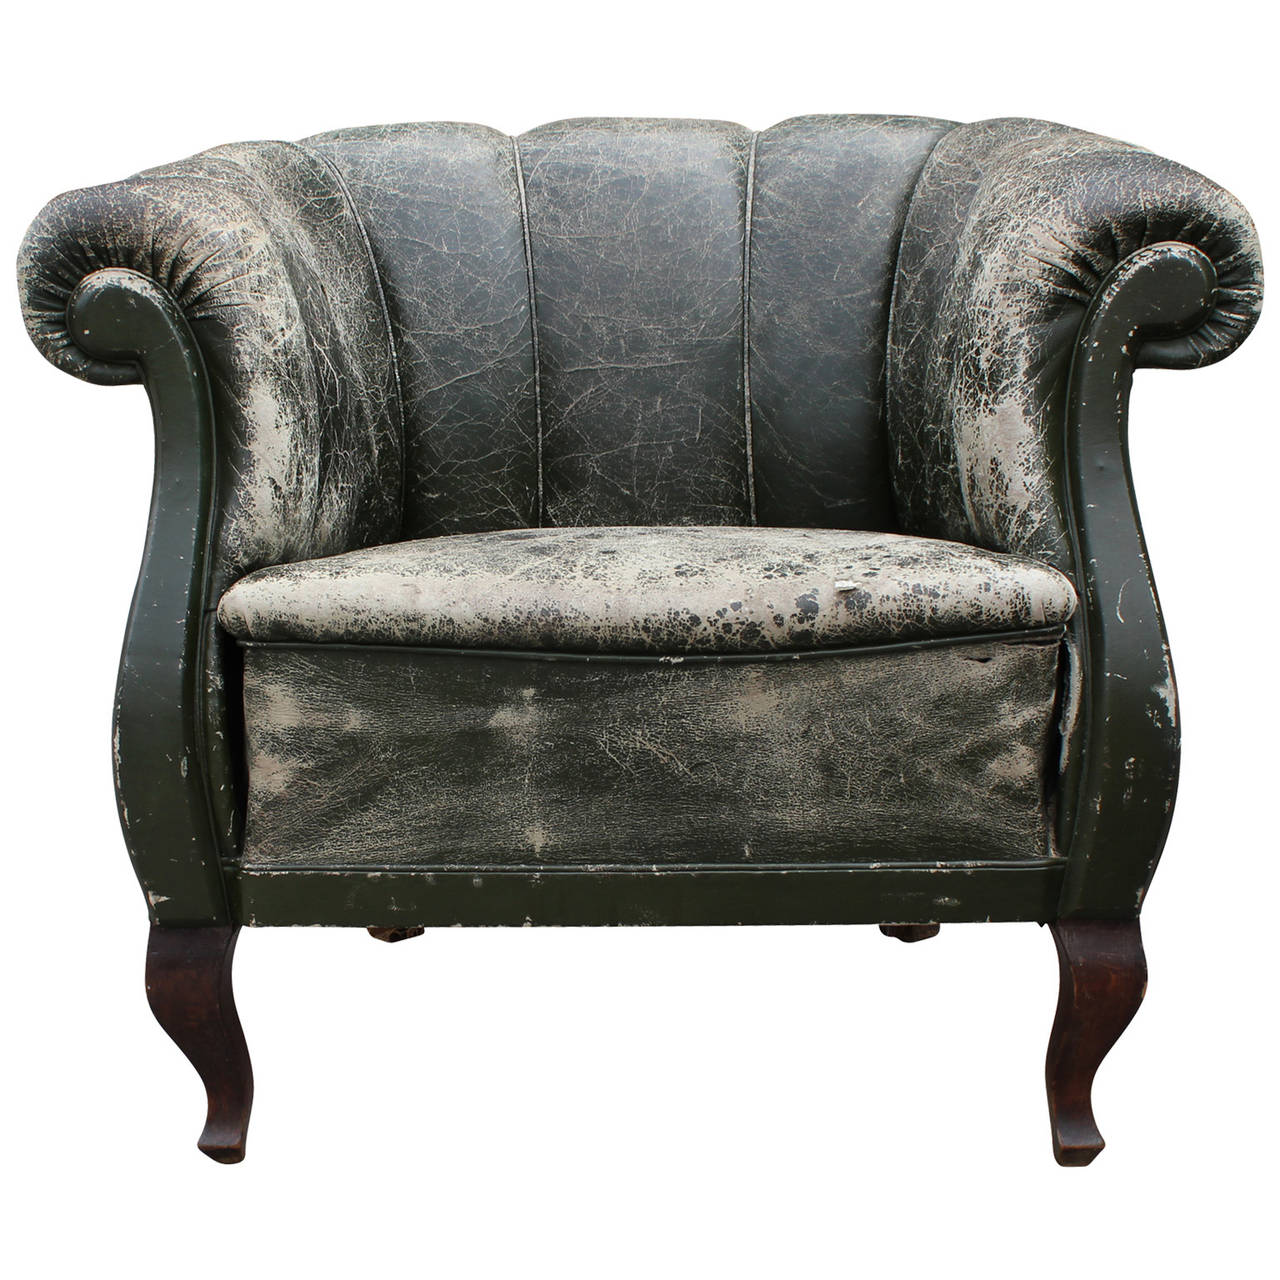 Incredible pair of rolled arm Chesterfield style club chairs with curved walnut legs. Cracked green leather has an incredible patina-some rips and tears only add to the aesthetic. Would make an incredible pair of chairs in the right room.